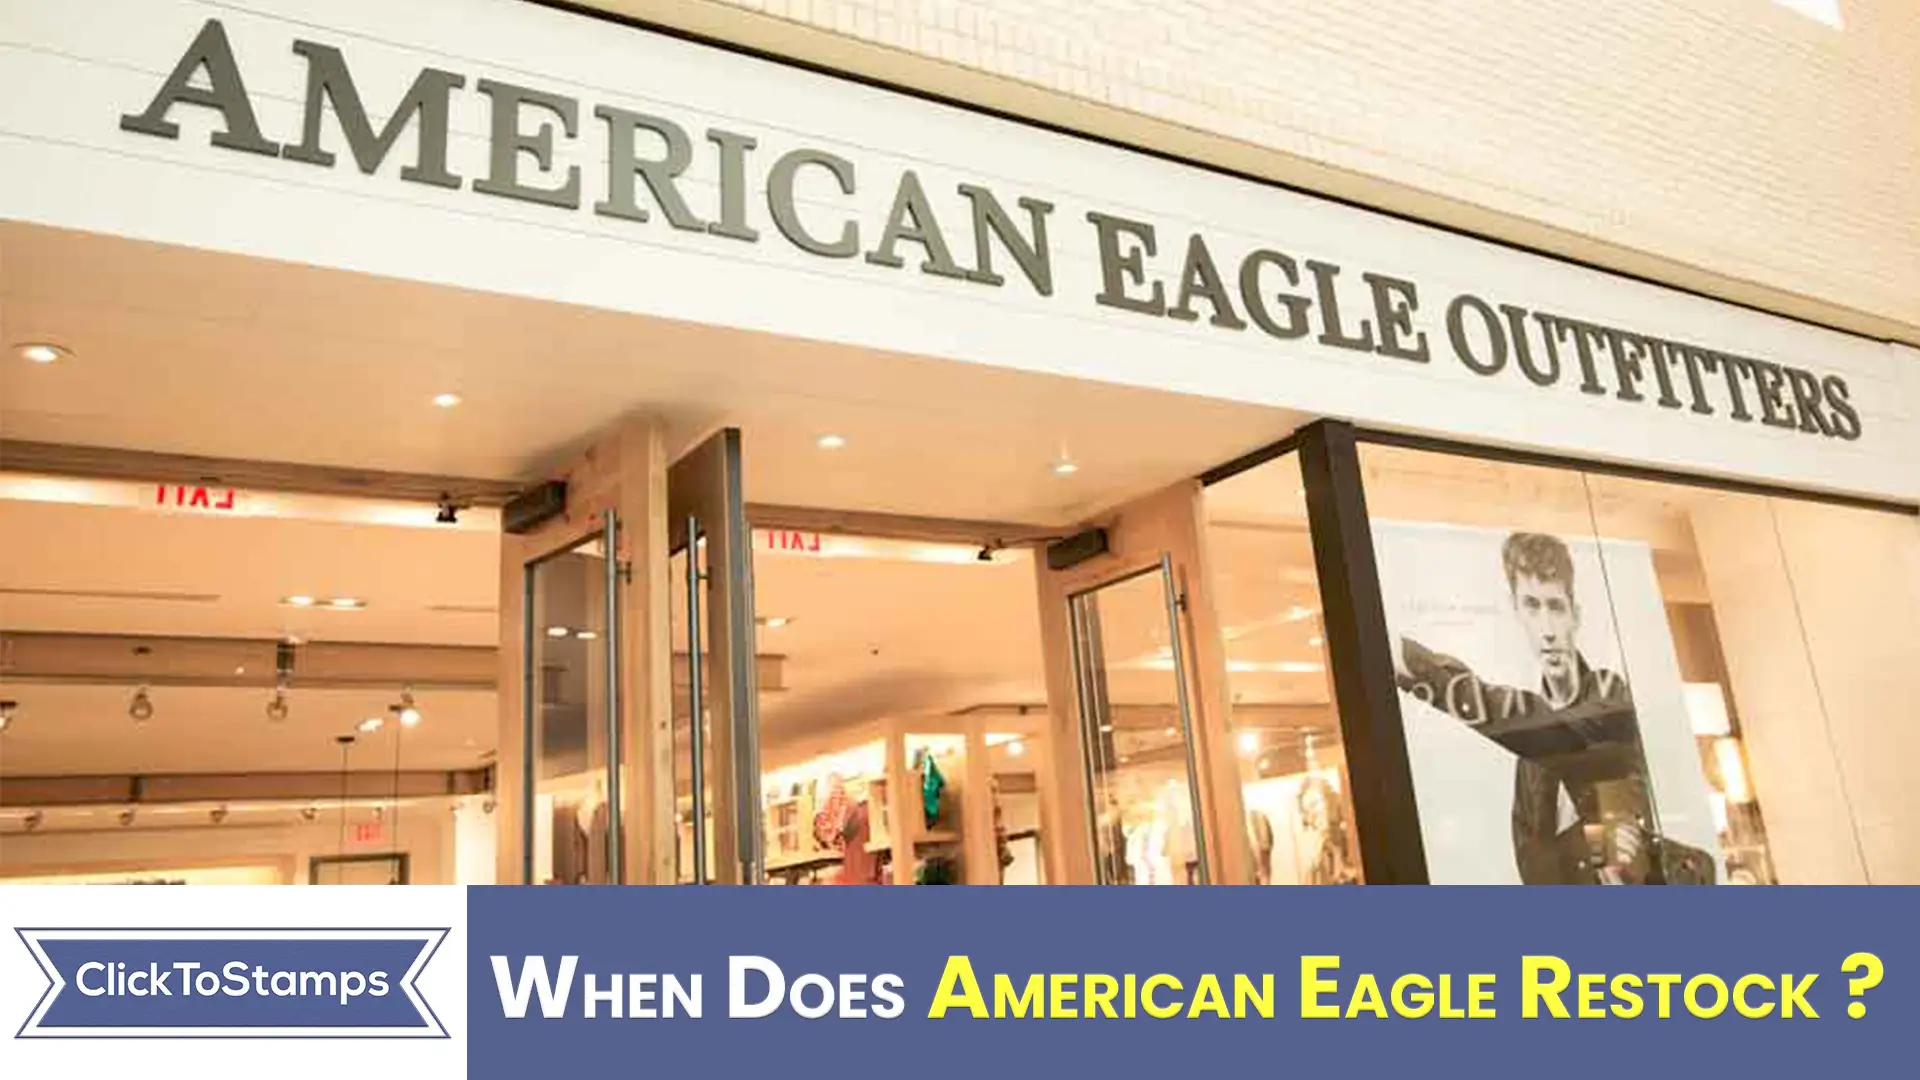 When Does American Eagle Restock